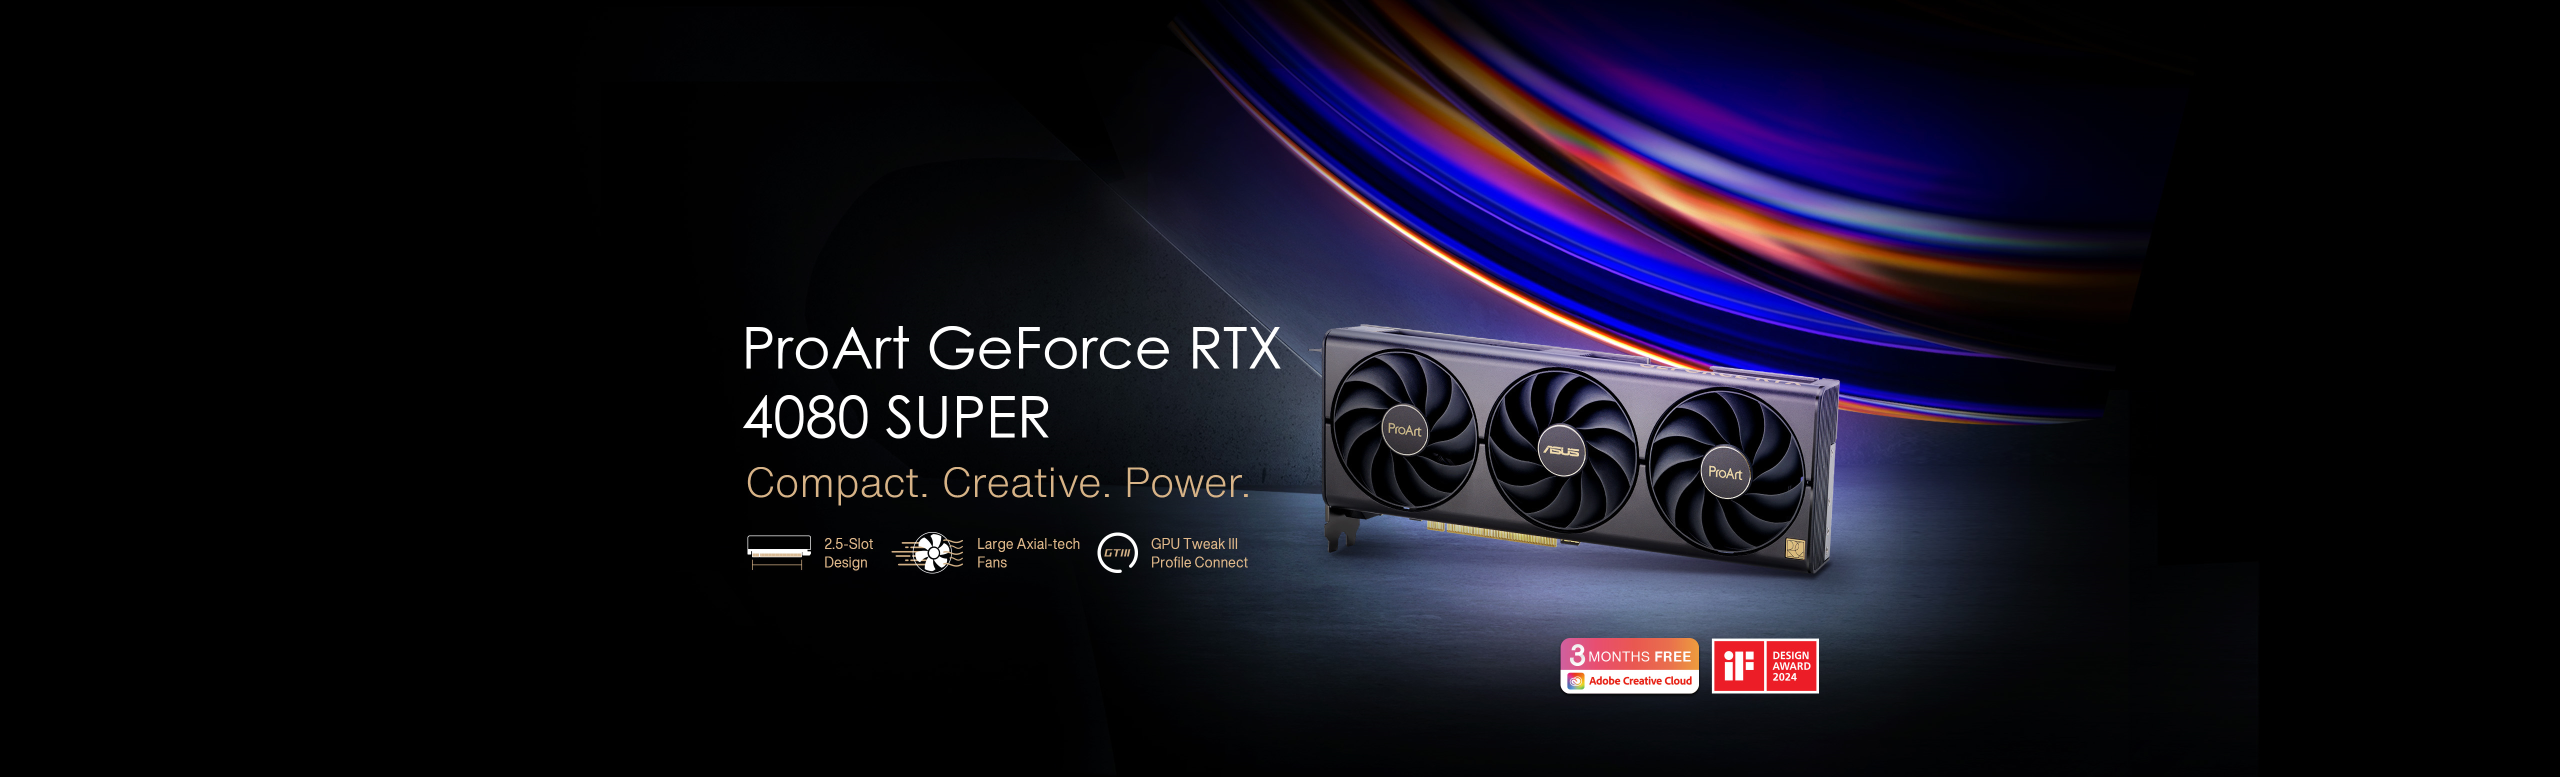 Learn more about ProArt GeForce RTX 4080 super